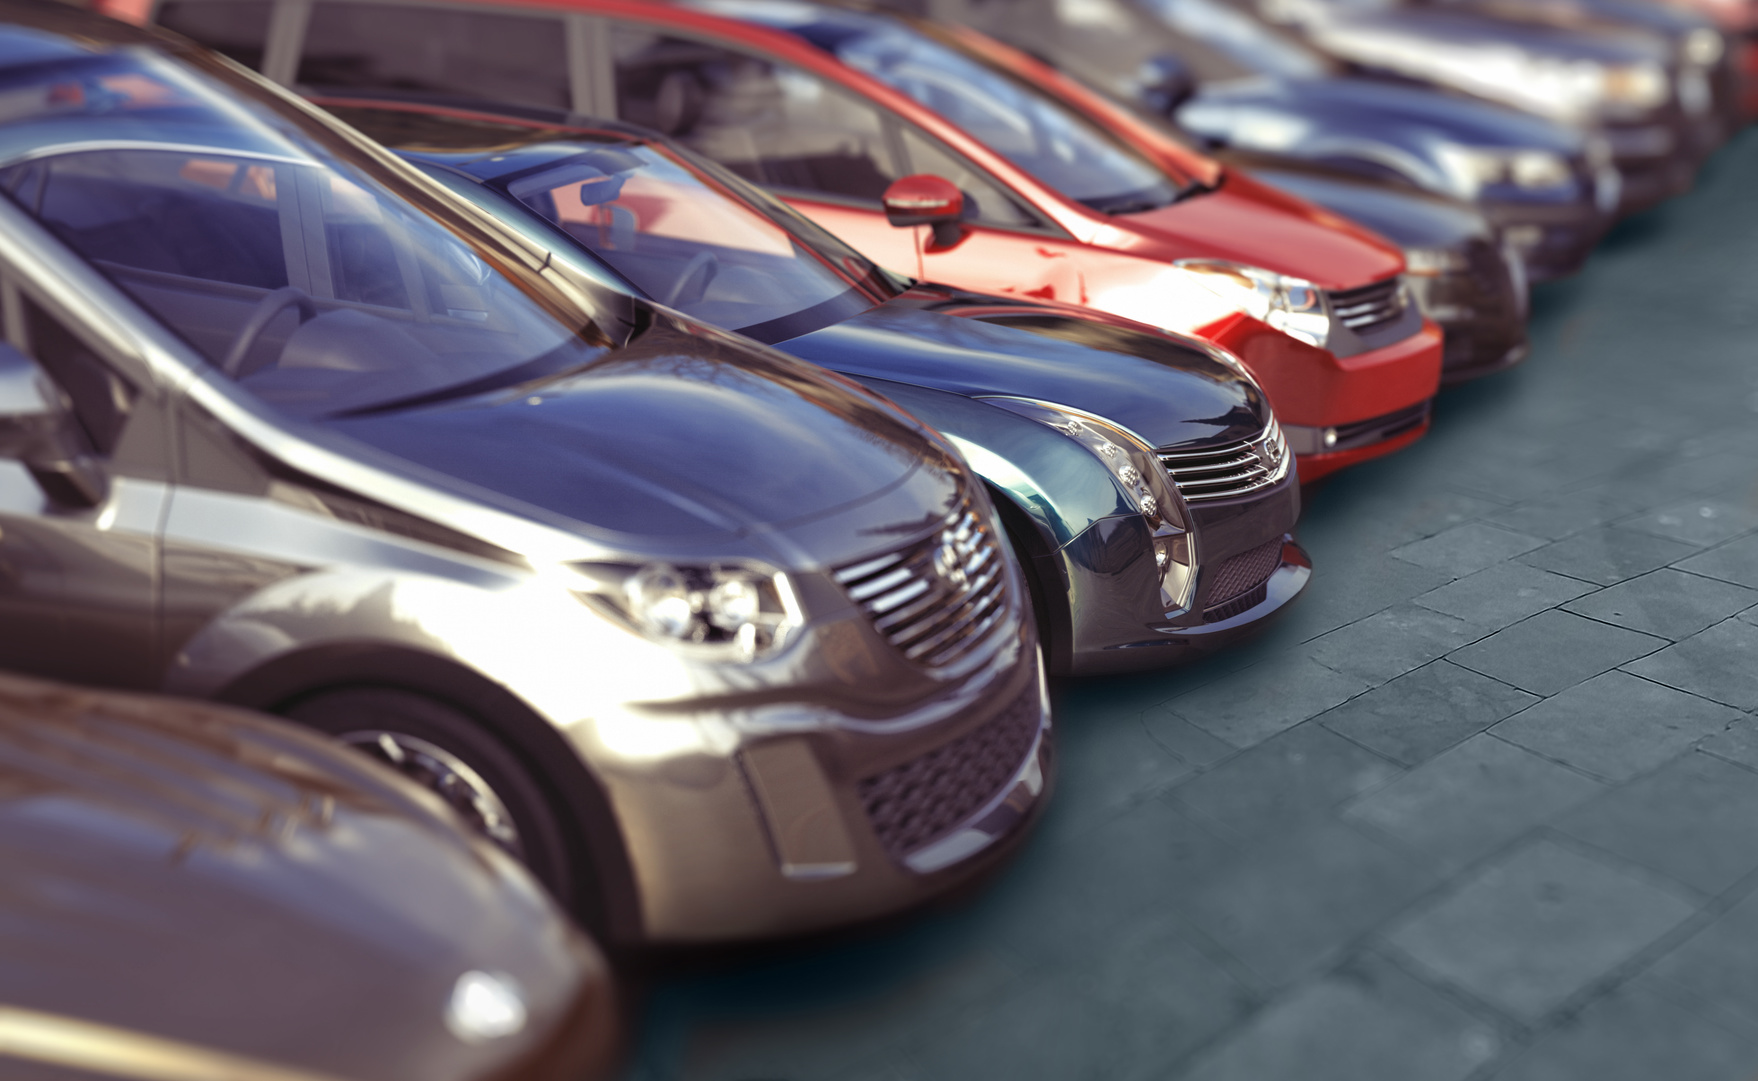 Cars in a line at a dealership